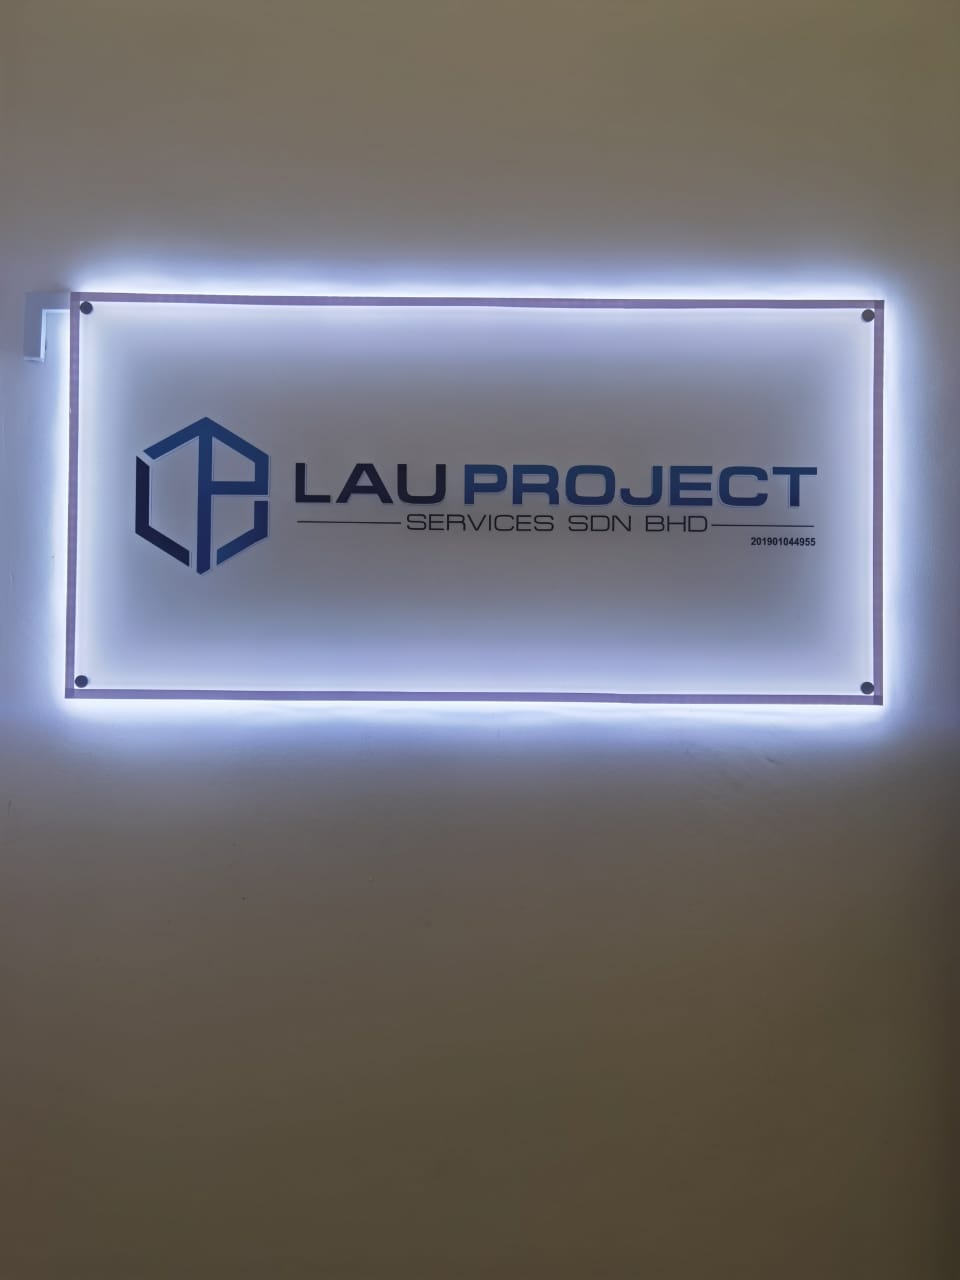 Lau Project Services Sdn. Bhd.